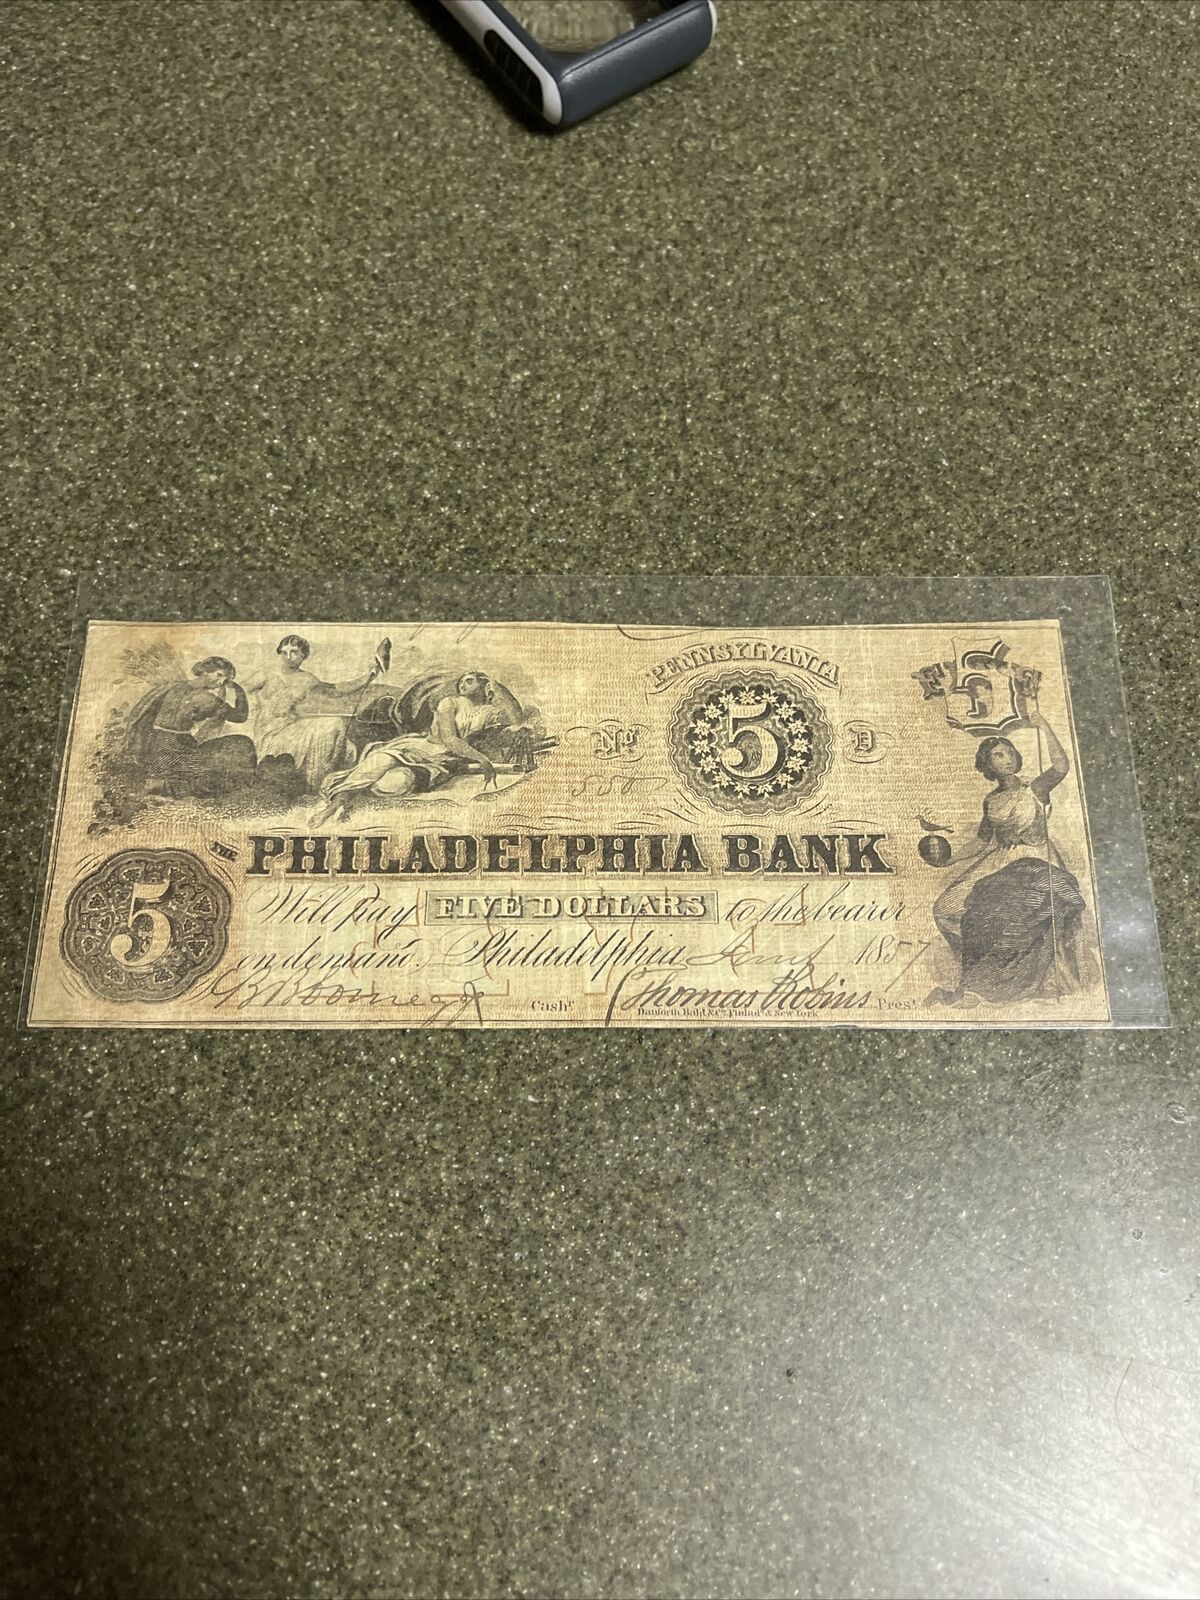 Philadelphia PA. 5 Recommendation Popular shop is the lowest price challenge Obsolete Note Dollar